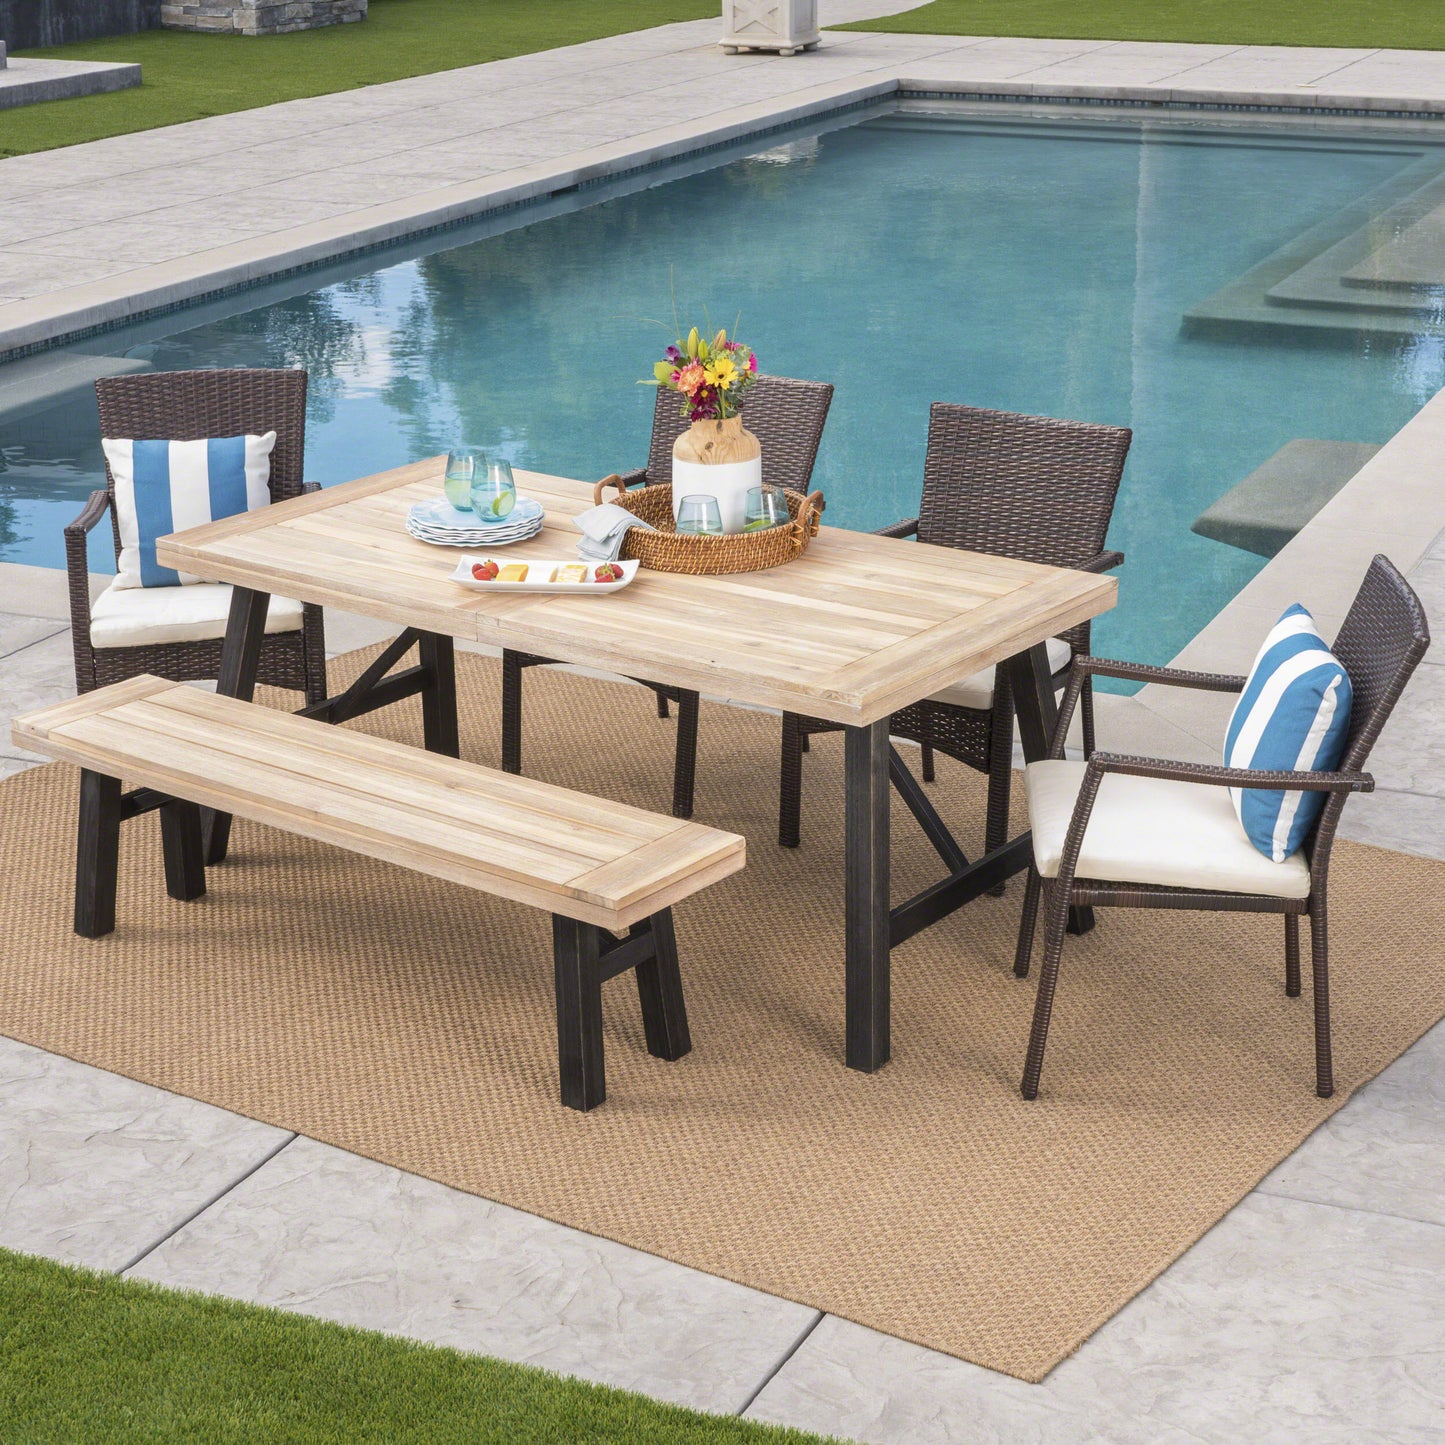 Hollister Outdoor 6 Piece Acacia Wood Dining Set with Wicker Dining Chairs